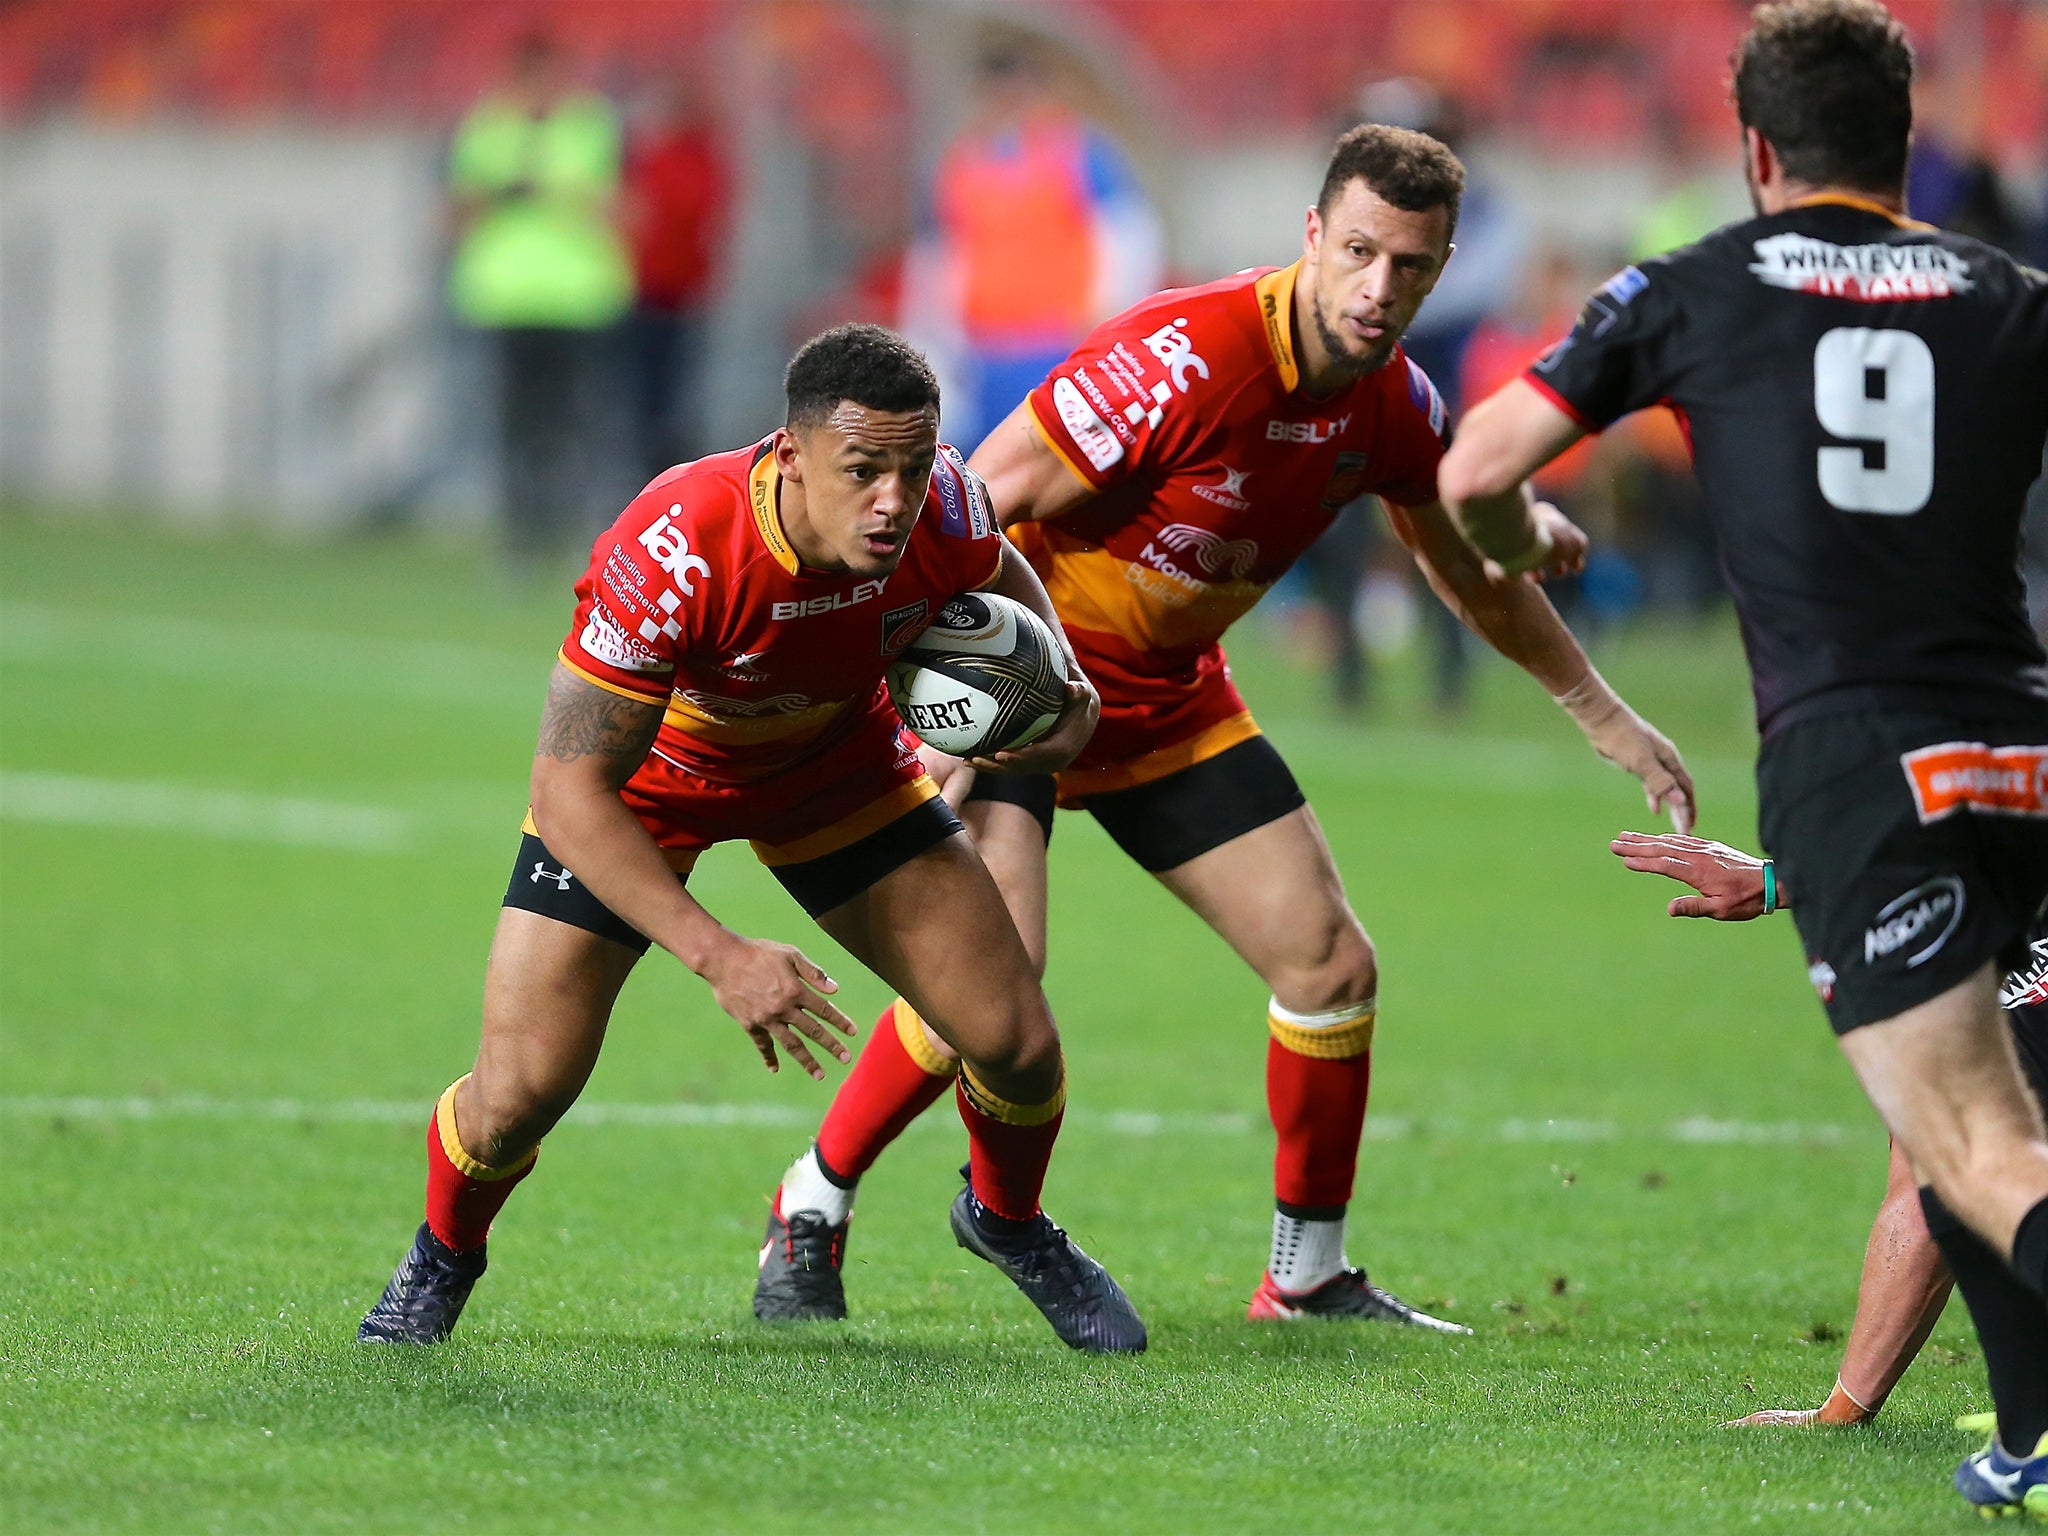 Ashton Hewitt has been called up to the Wales squad